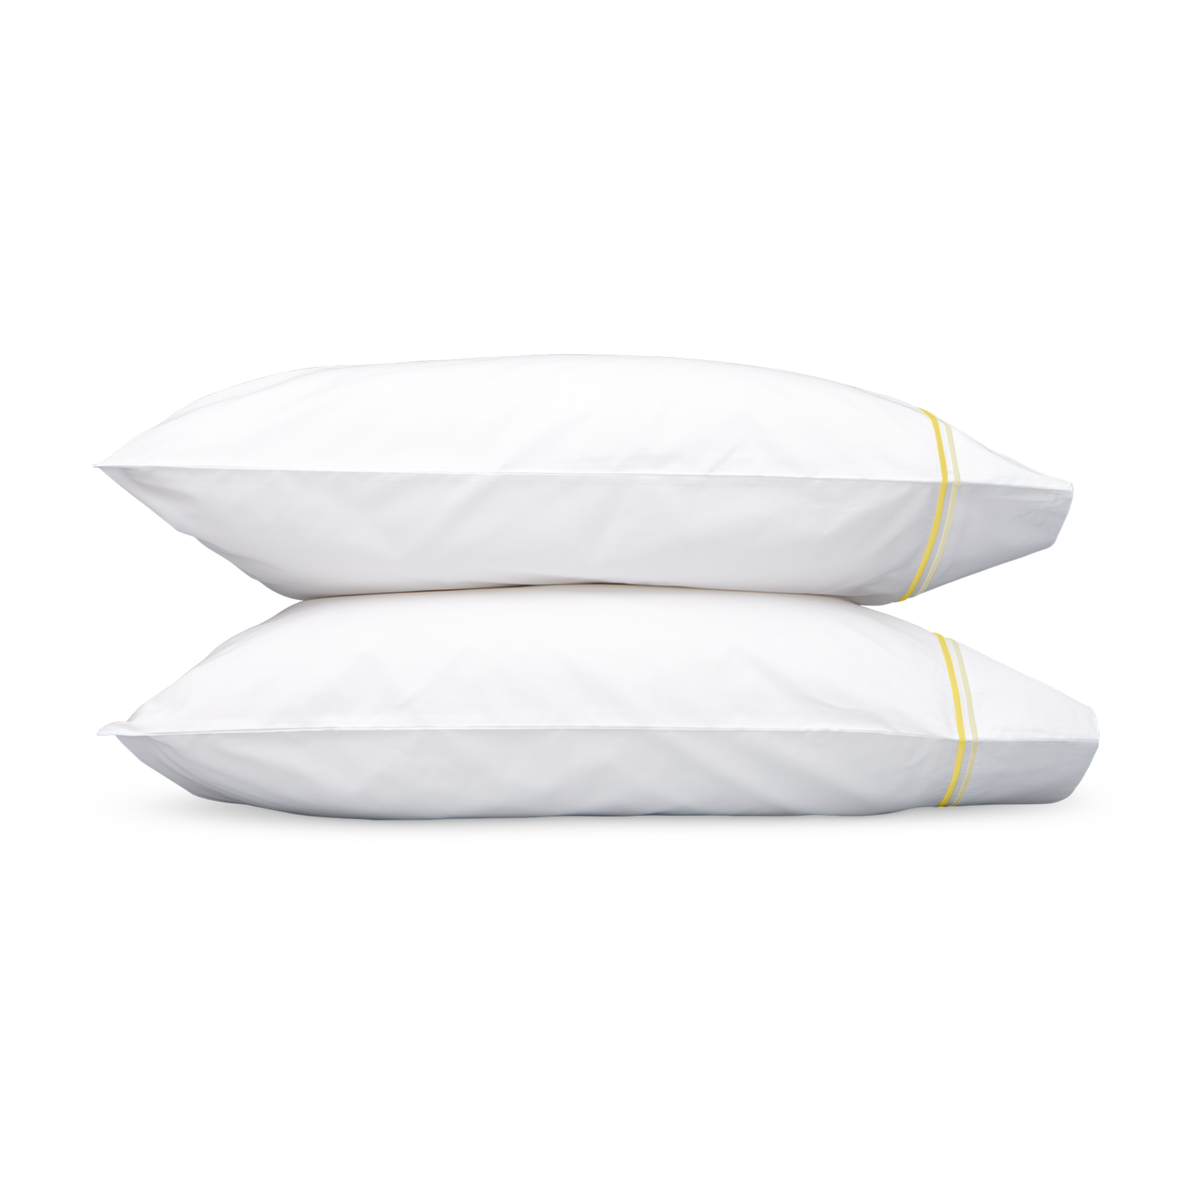 Pair of Pillowcases of Matouk Essex Bedding Collection in Lemon Color